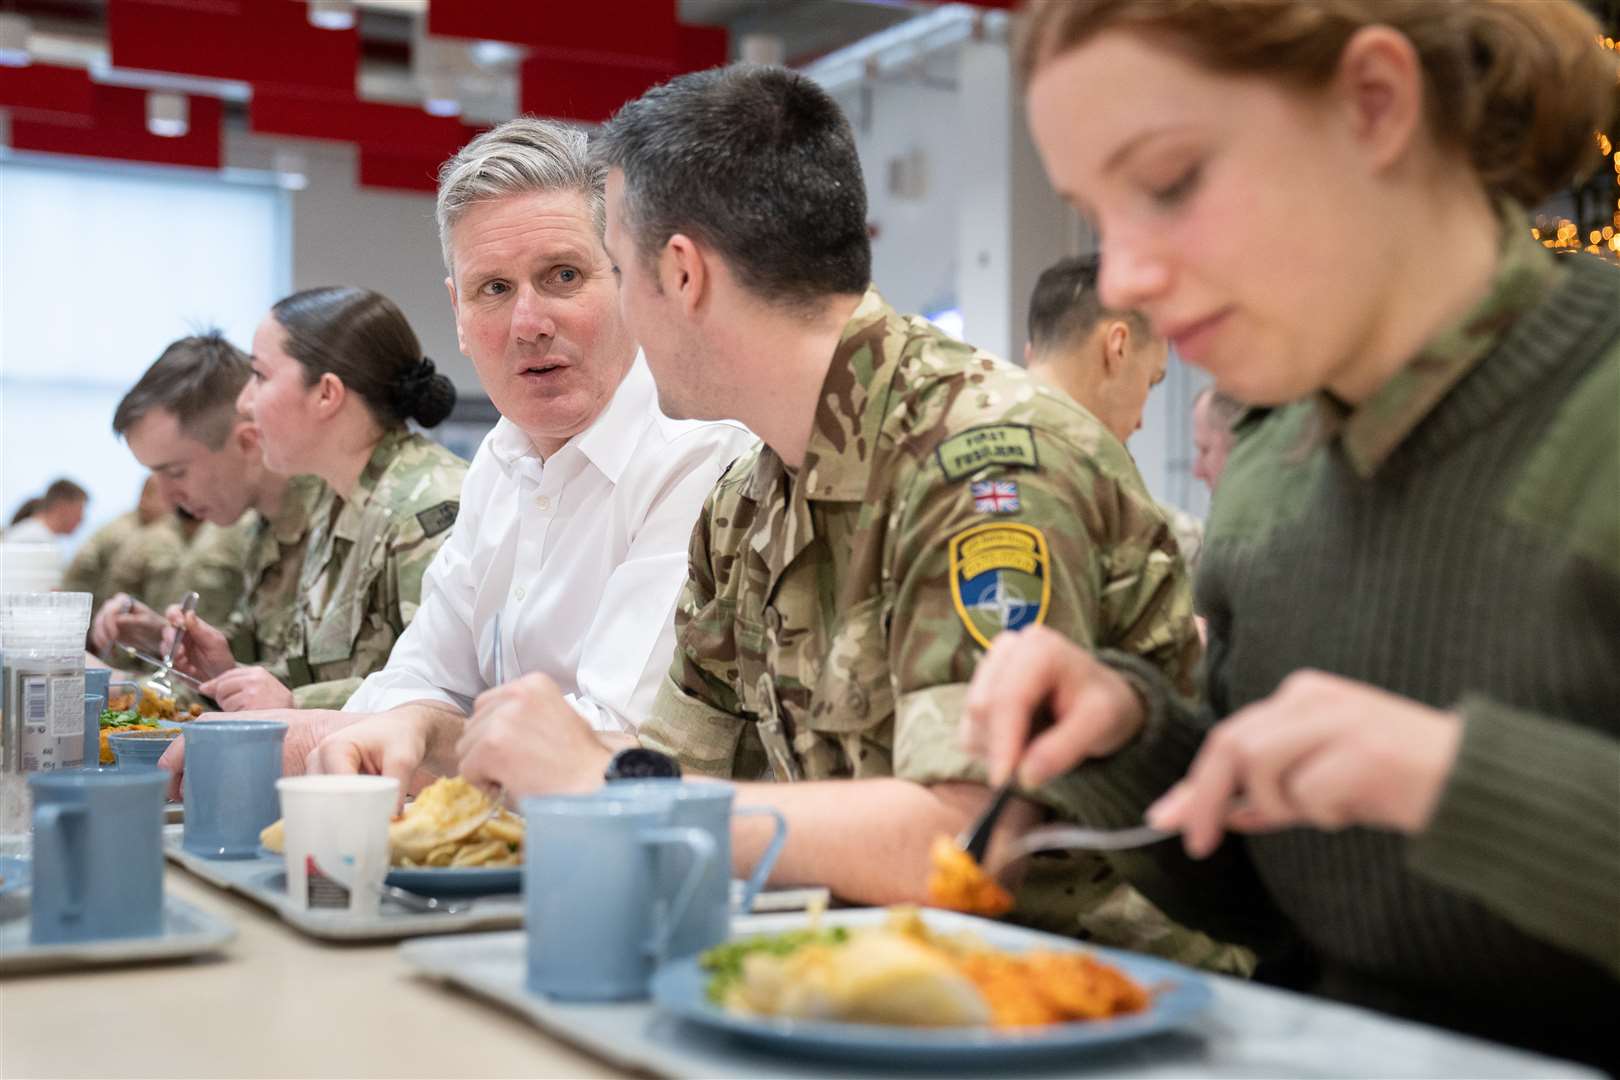 Sir Keir Starmer has lunch with members of the British armed forces at the Tapa Nato base in Estonia (Stefan Rousseau/PA)